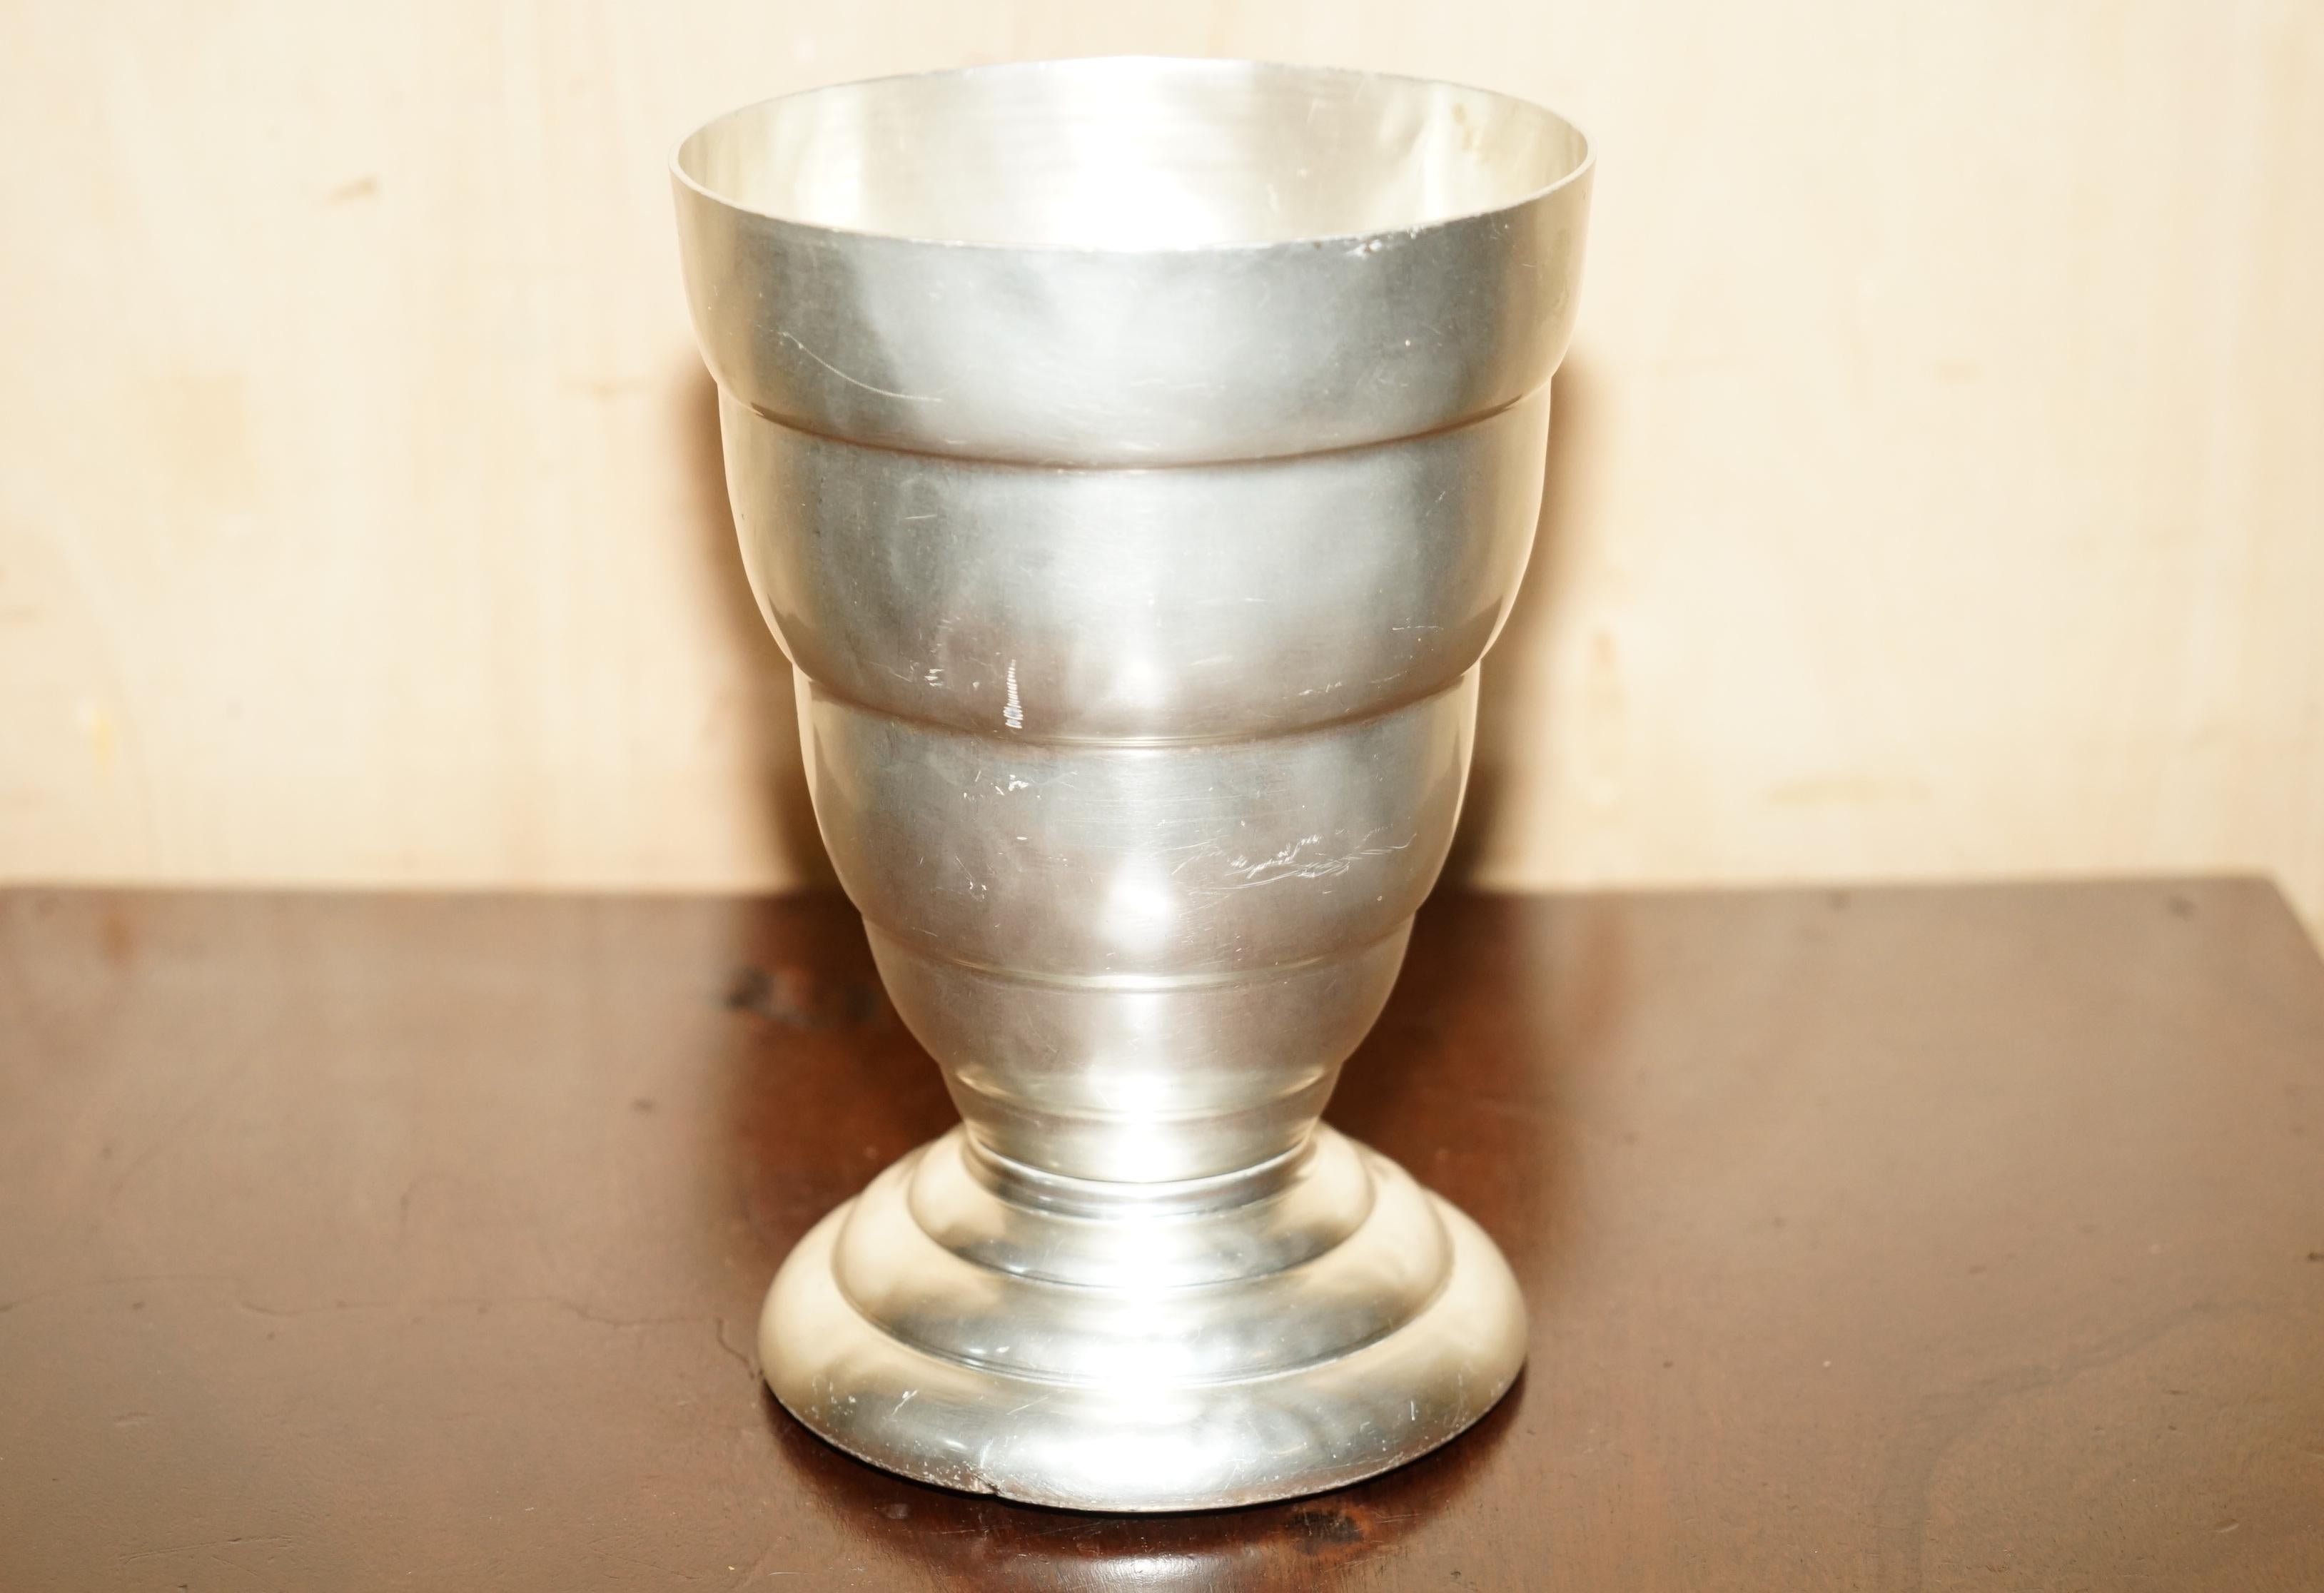 Royal House Antiques is delighted to offer for sale this lovely Art Deco Circa 1930's Silver Plated Champagne bucket which can of course be used for wine and ice as well

A good looking and well made, decorative example, the bucket has the original